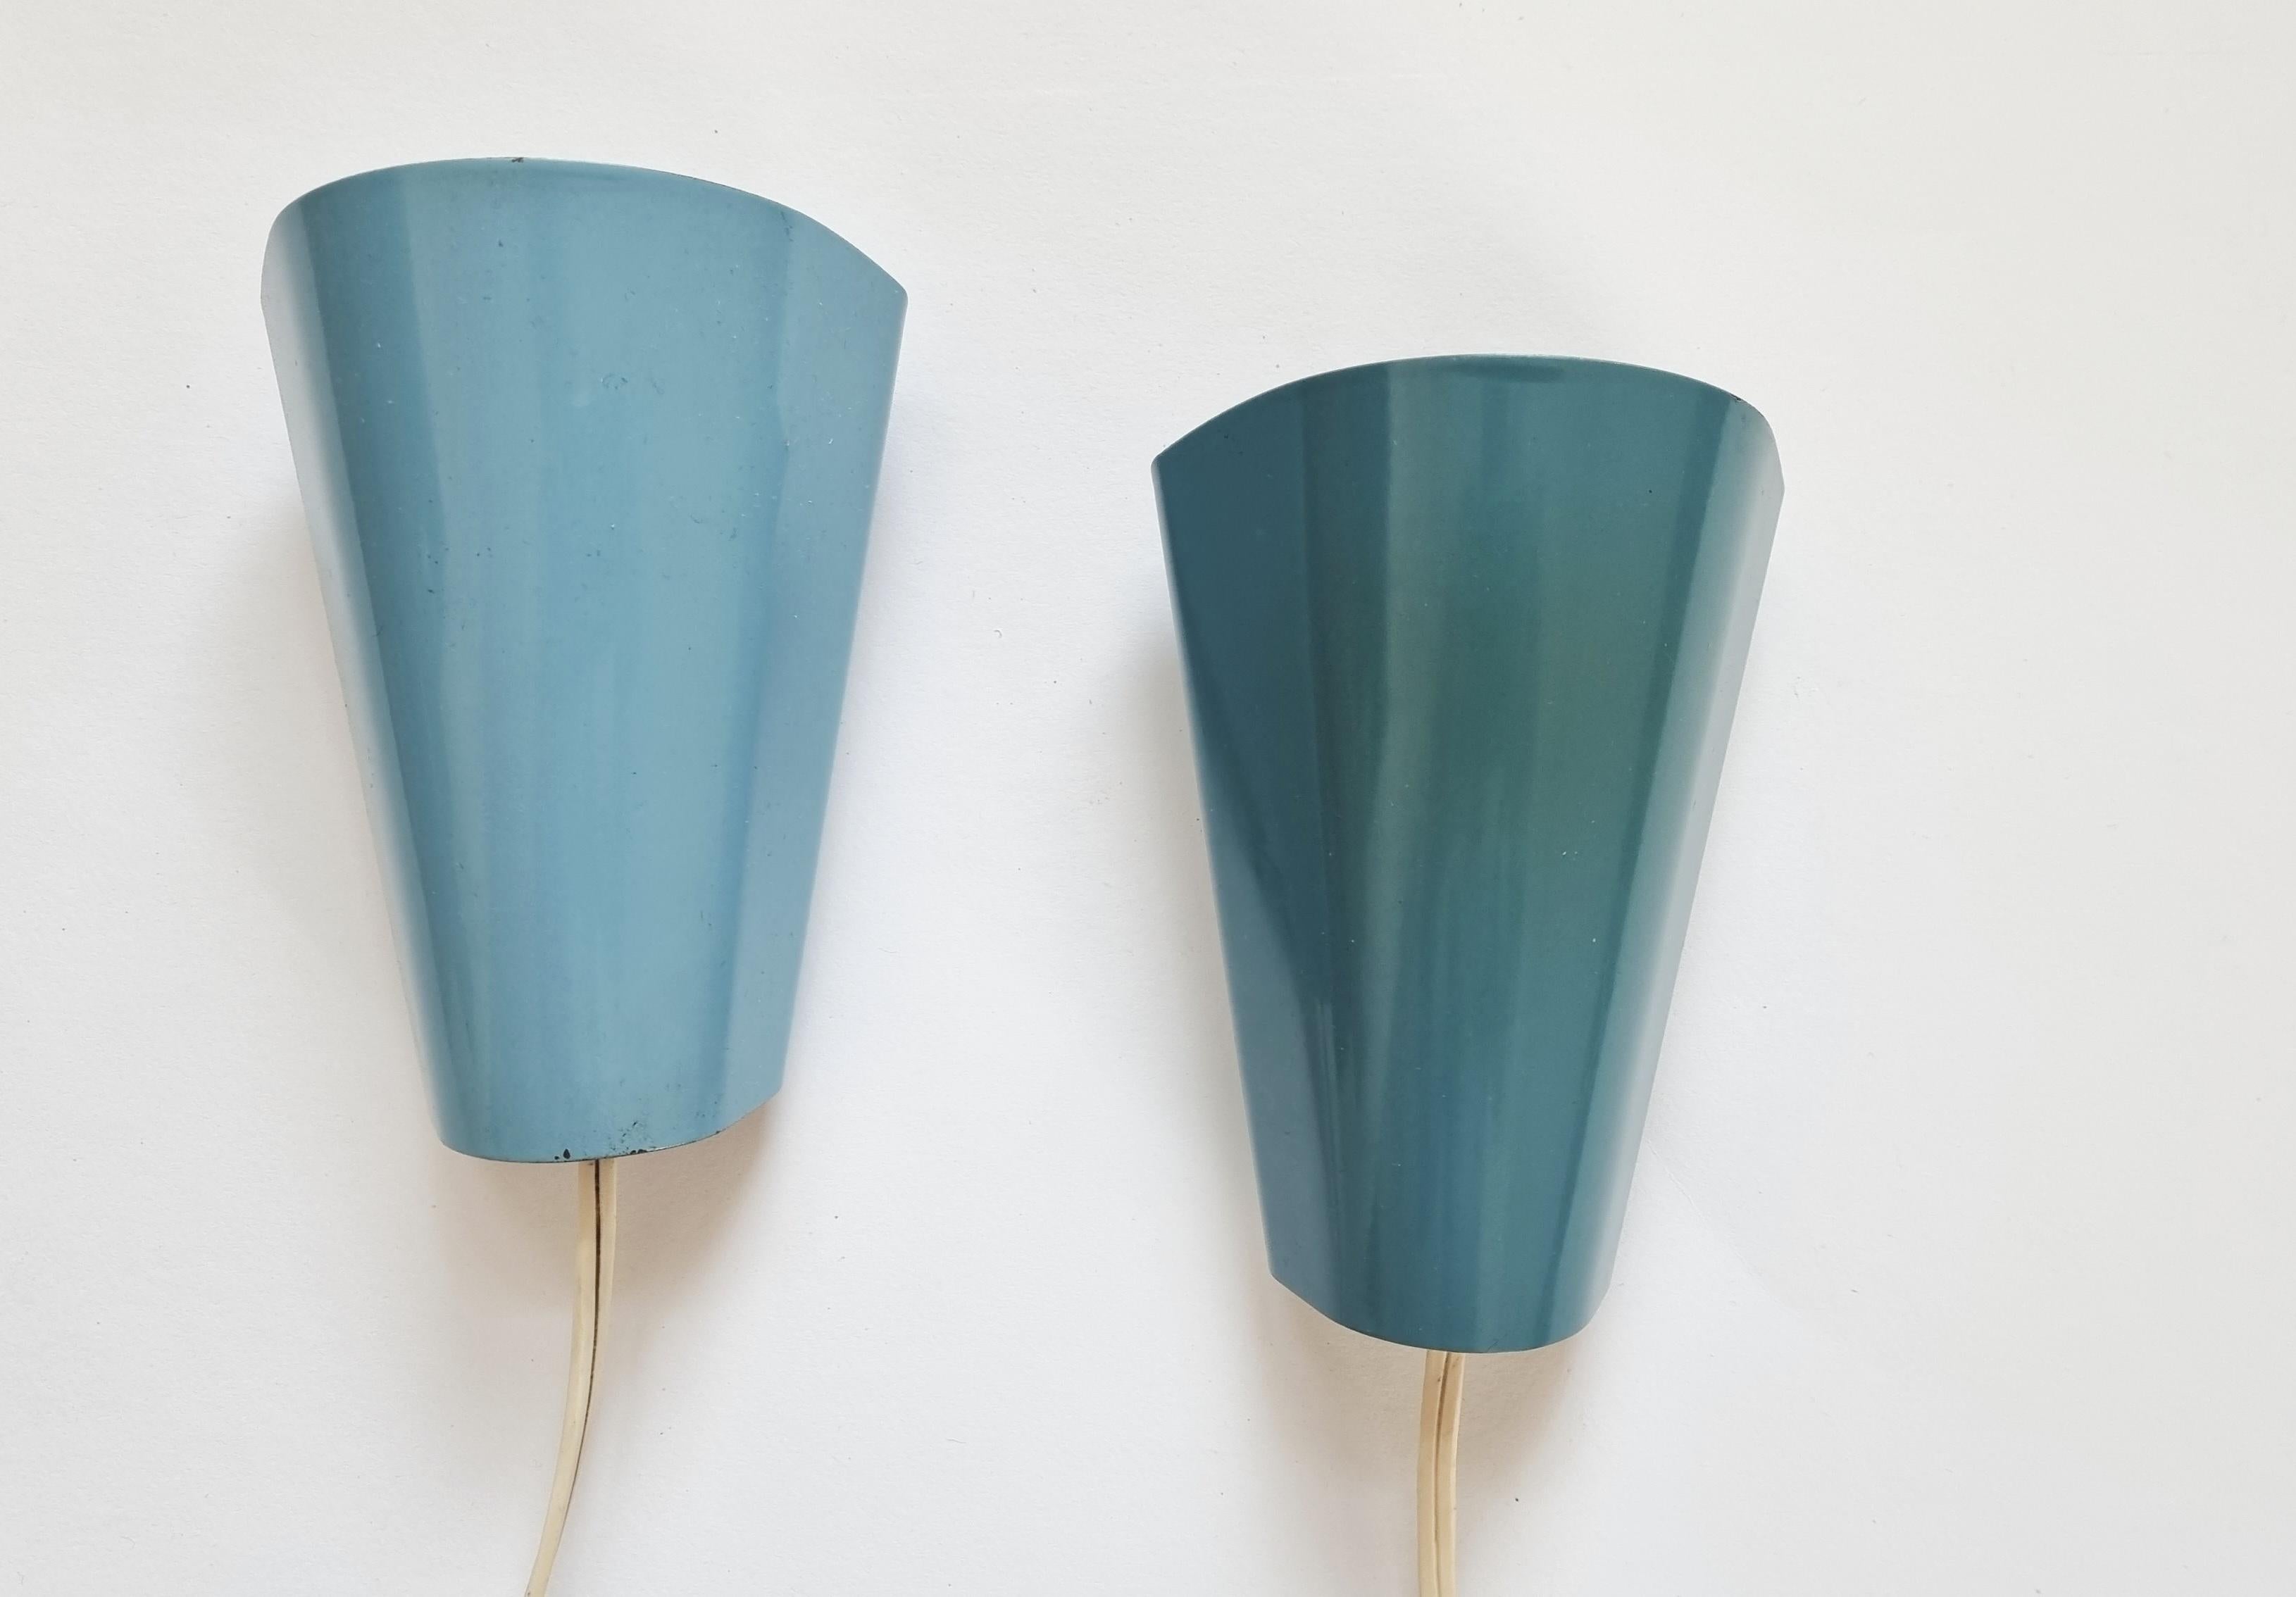 Set of 2 Midcentury Wall Lamps, Lidokov, Josef Hurka, 1960s In Good Condition For Sale In Praha, CZ